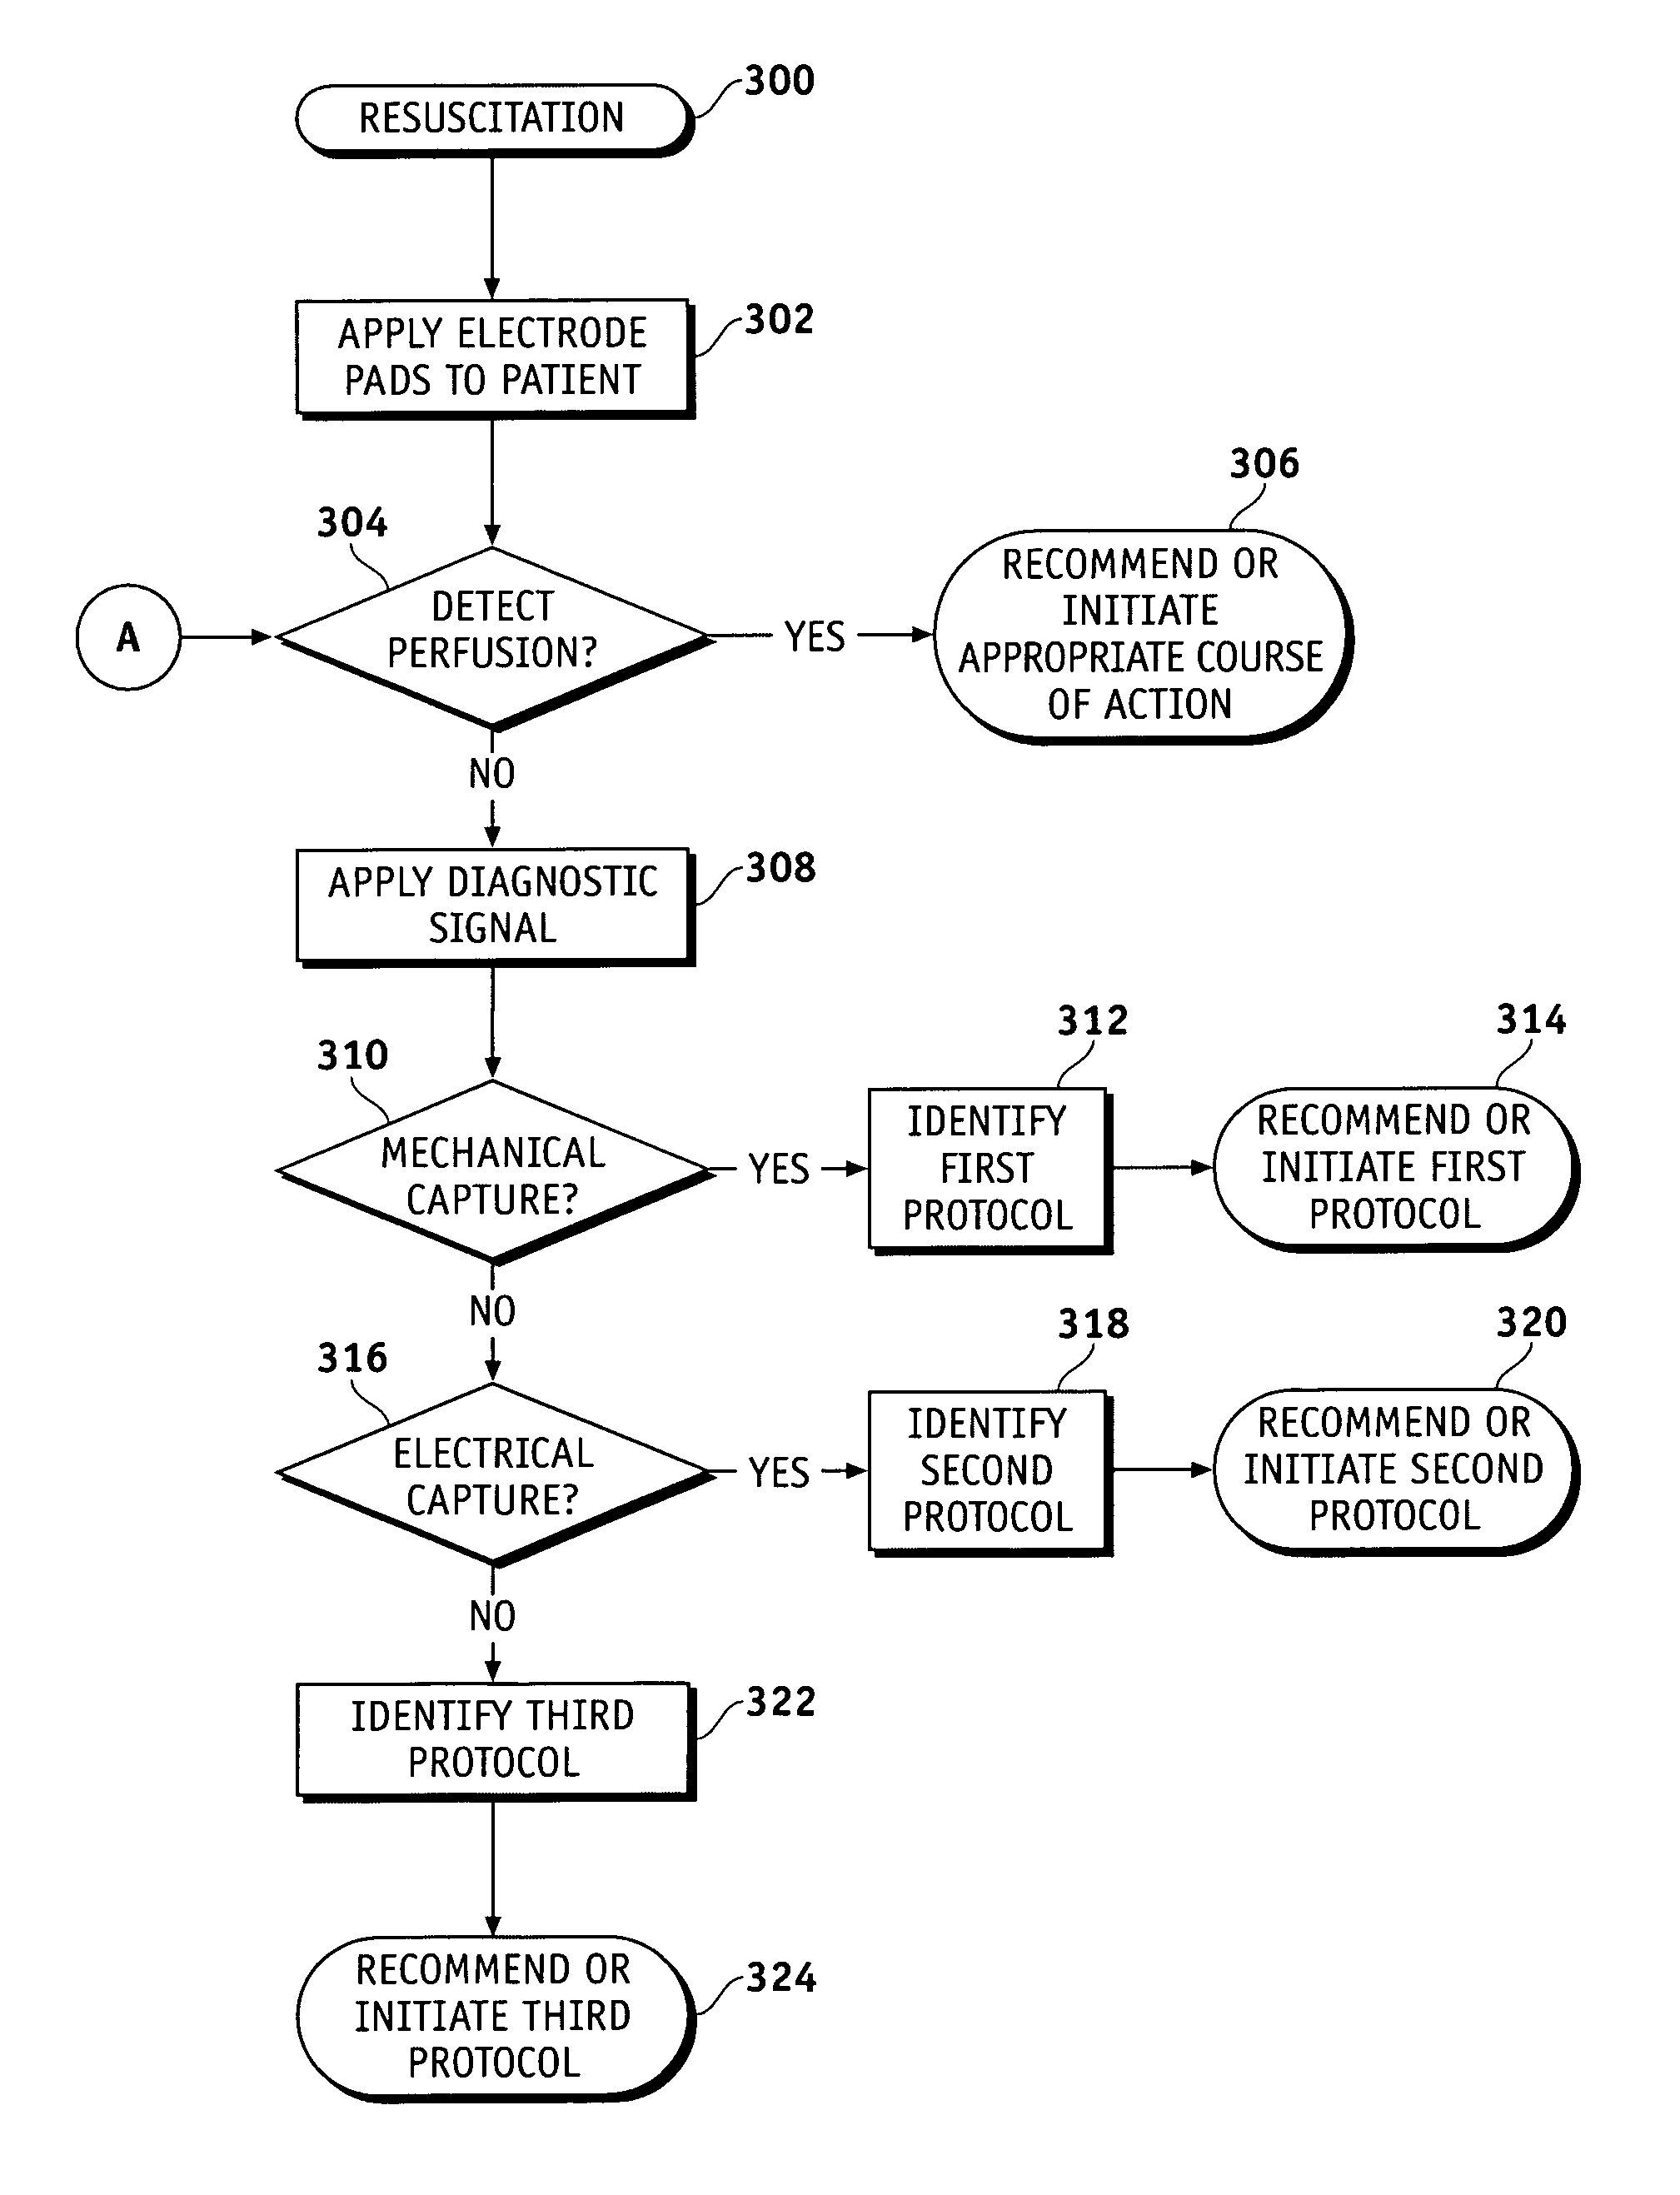 System and method for using diagnostic pulses in connection with defibrillation therapy